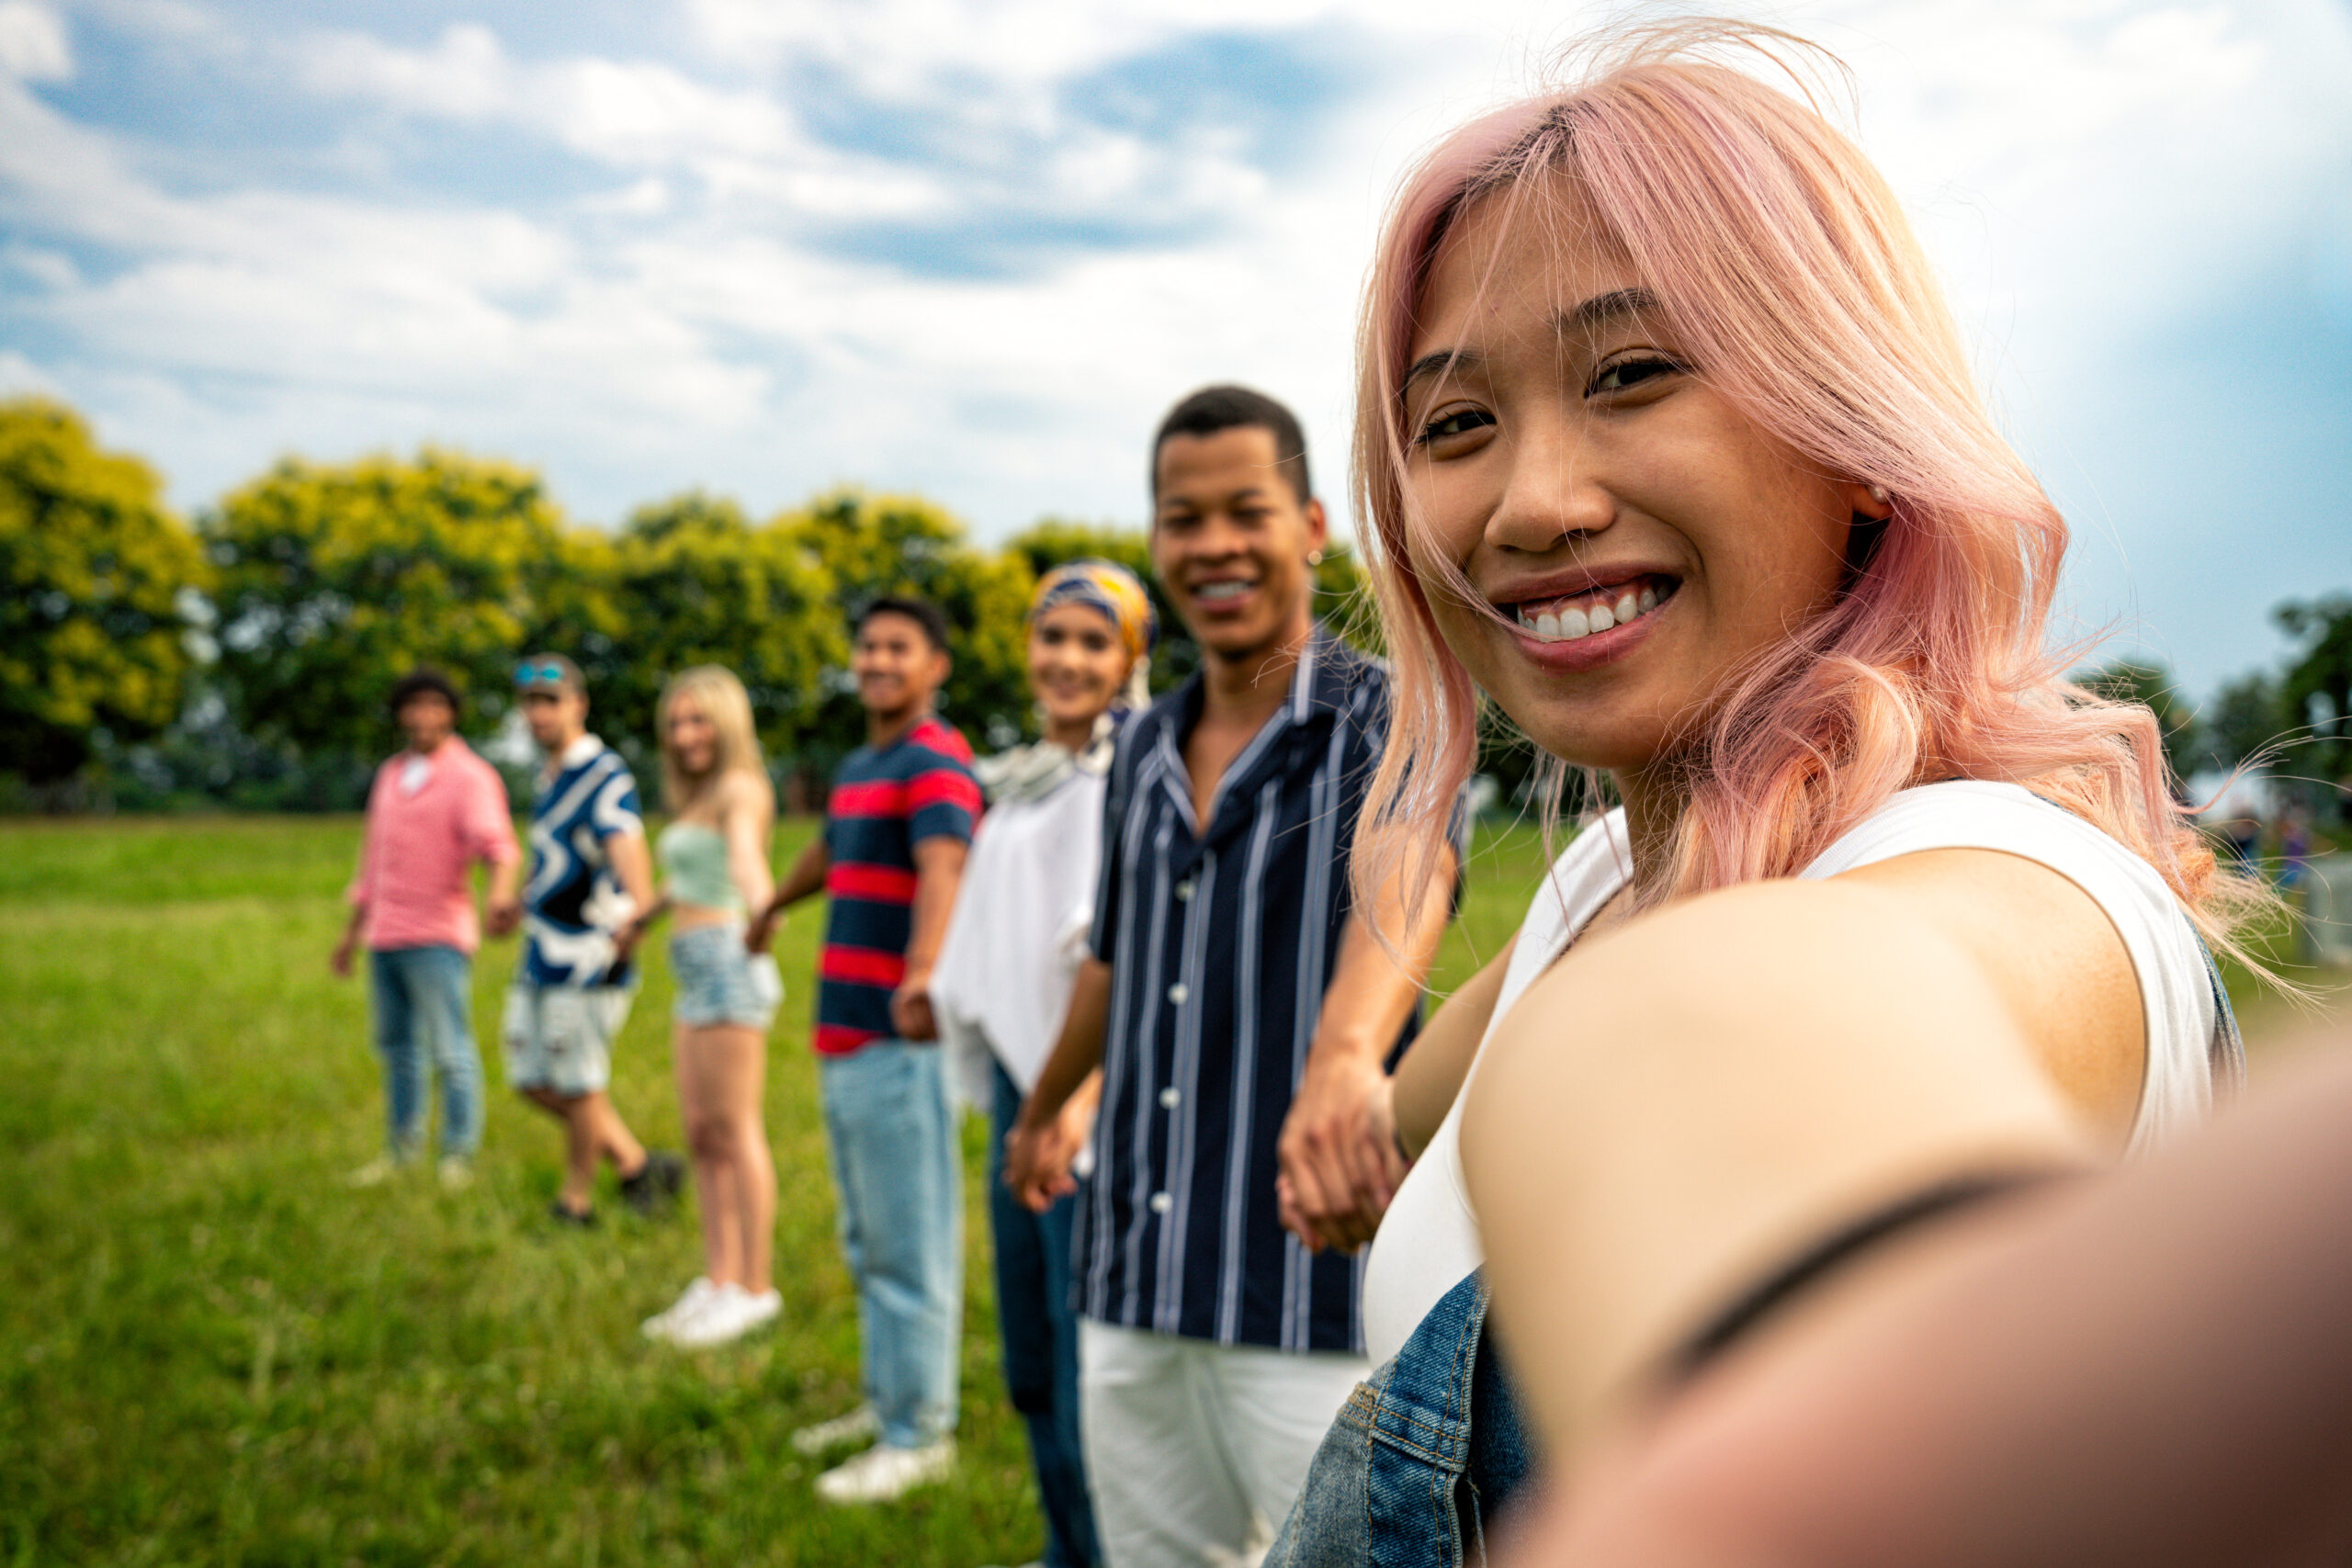 Group of multiethnic teenagers spending time outdoor on a picnic at the park. Concept about generation z, lifestyle and friendship - cultivating joy